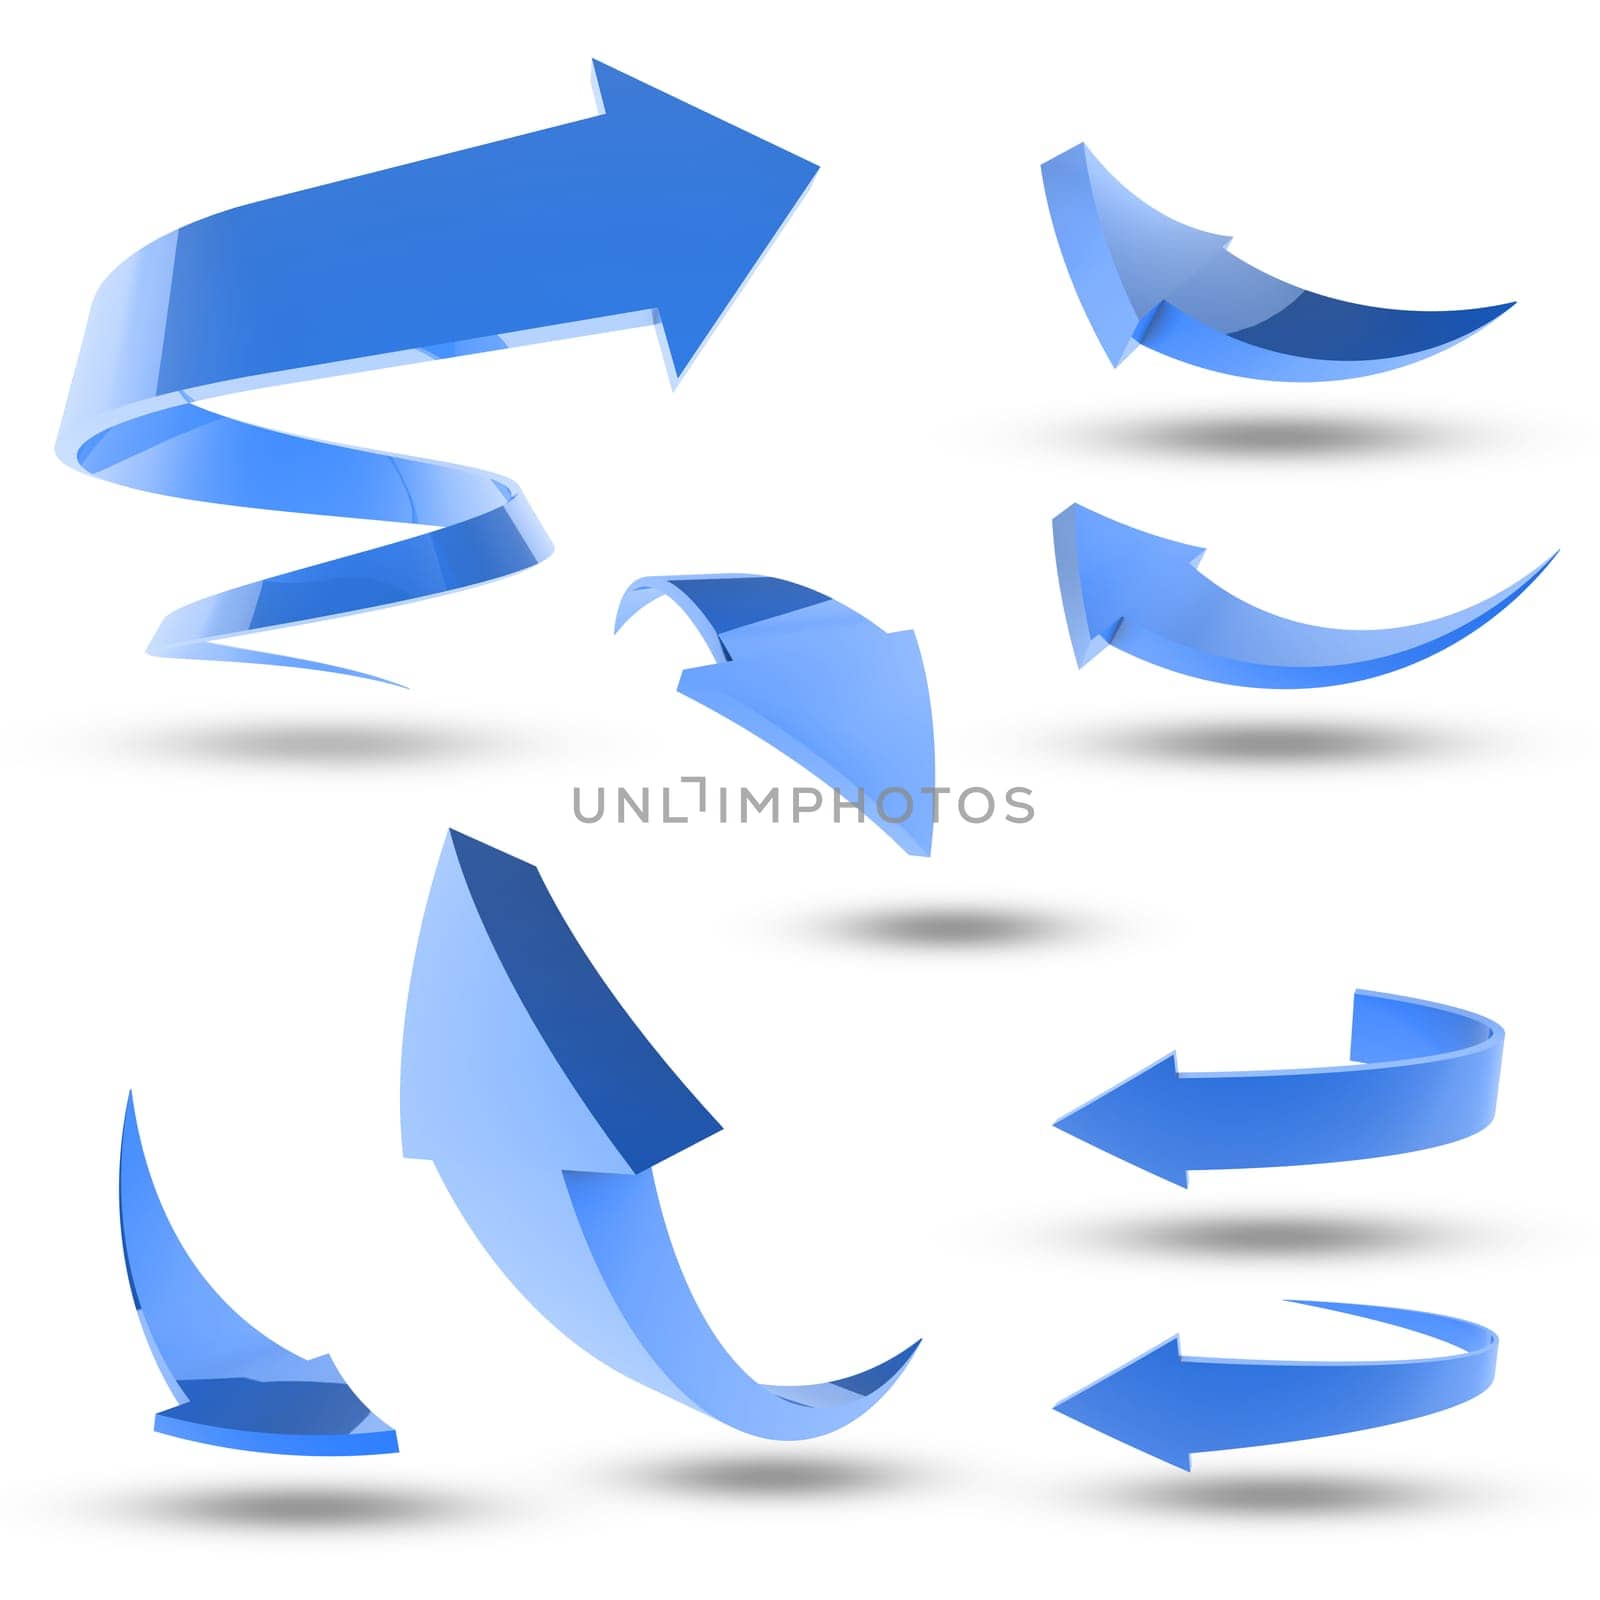 Arrows, direction and white background with blue icon for target with design. Graphic, pointer and symbol for illustration in technology for online with information to review network or data